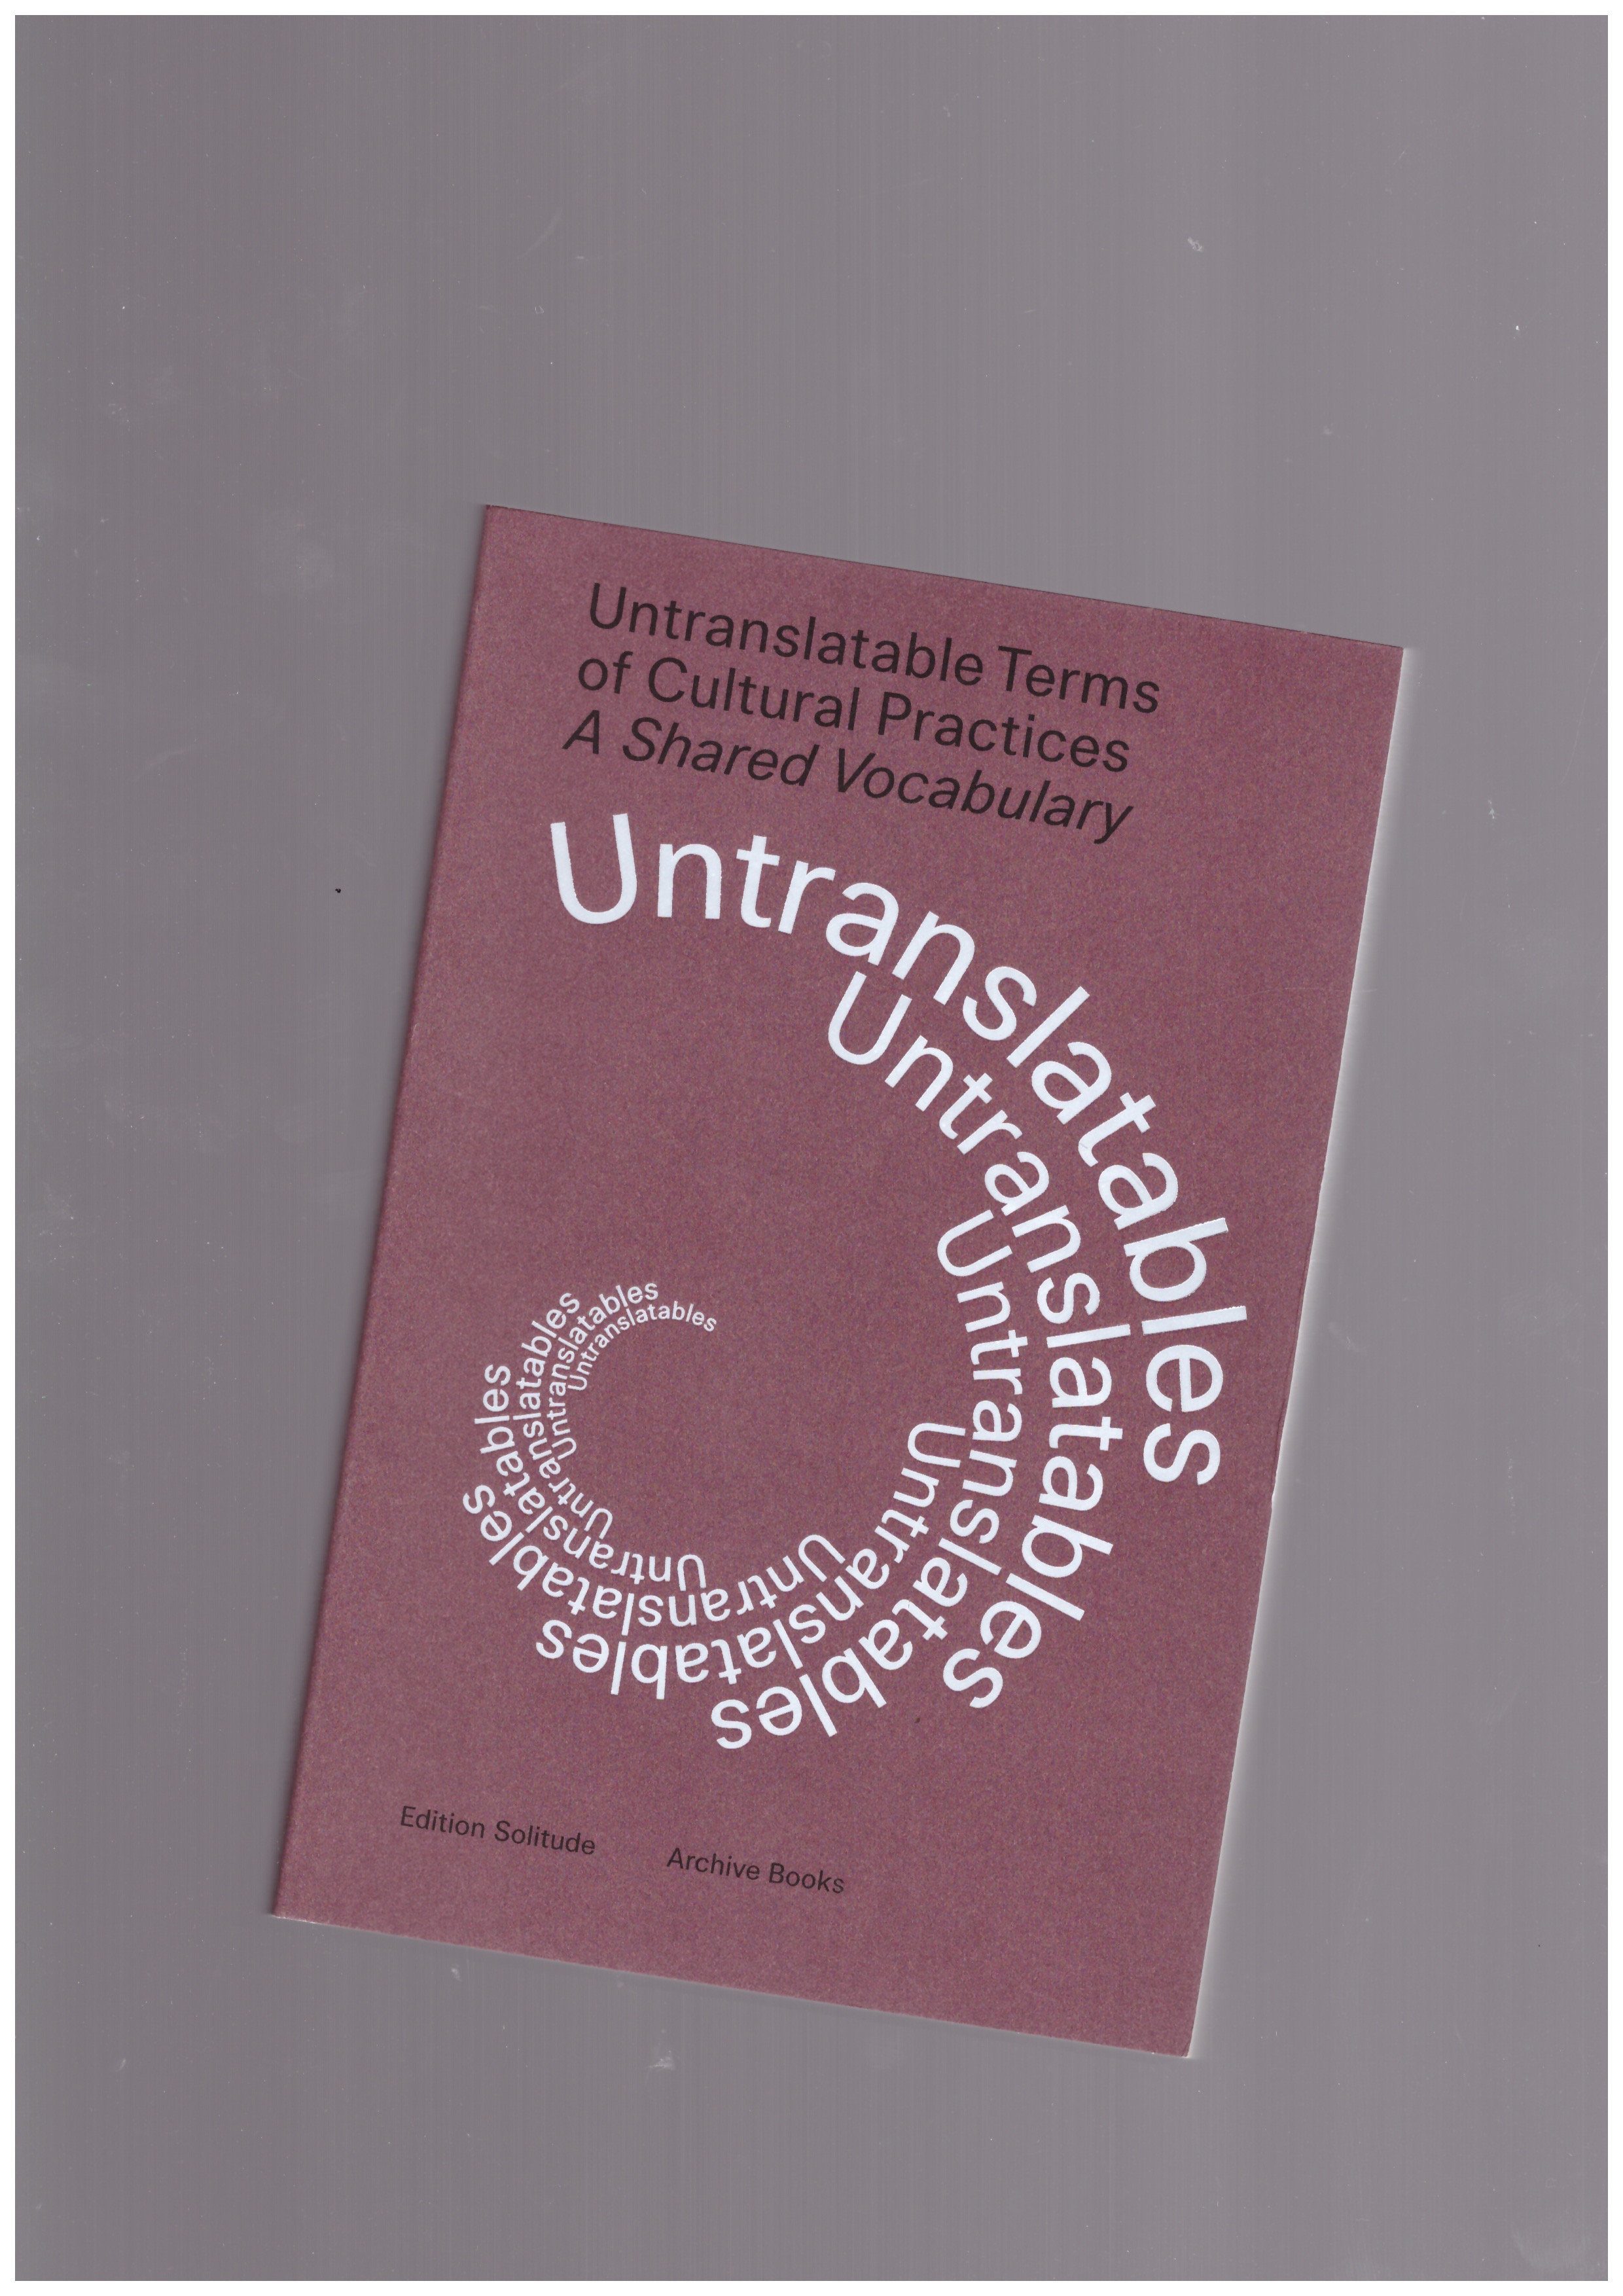 AUS DEM MOORE, Elke (ed.) - Untranslatable Terms of Cultural Practices. A Shared Vocabulary